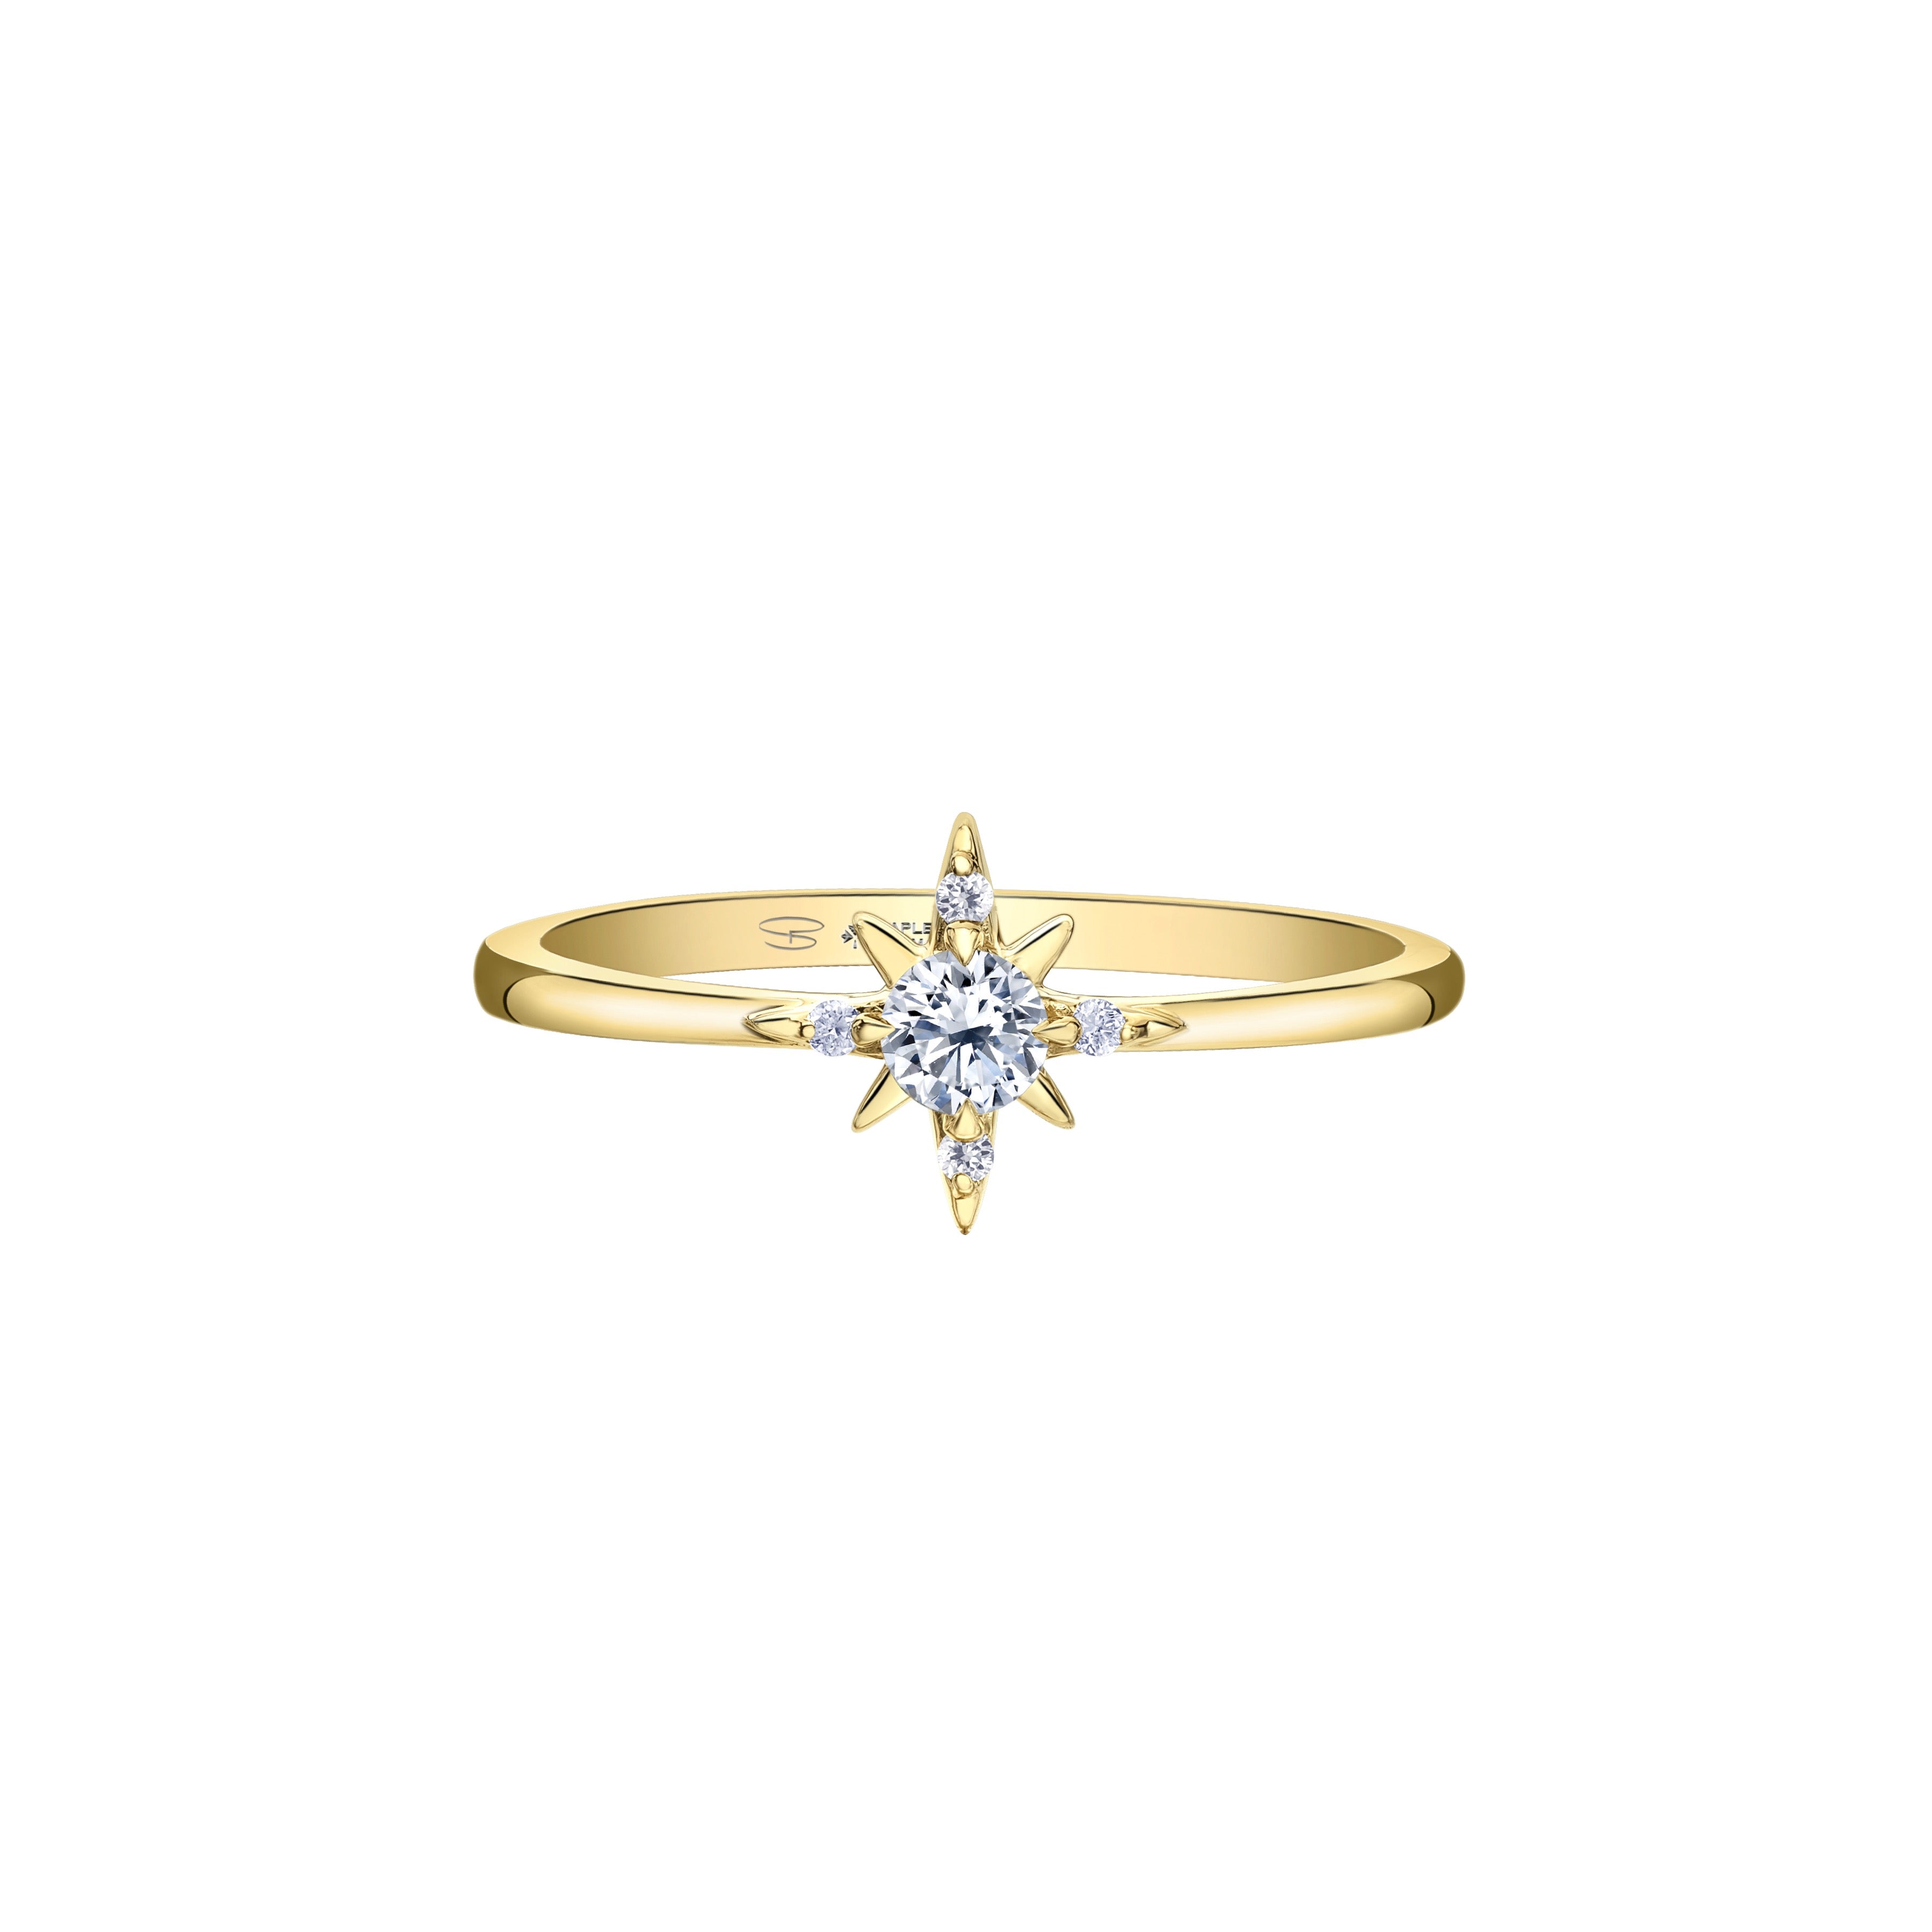 Crafted in 14KT yellow Certified Canadian Gold, this ring features the north star set with round brilliant-cut Canadian diamonds.